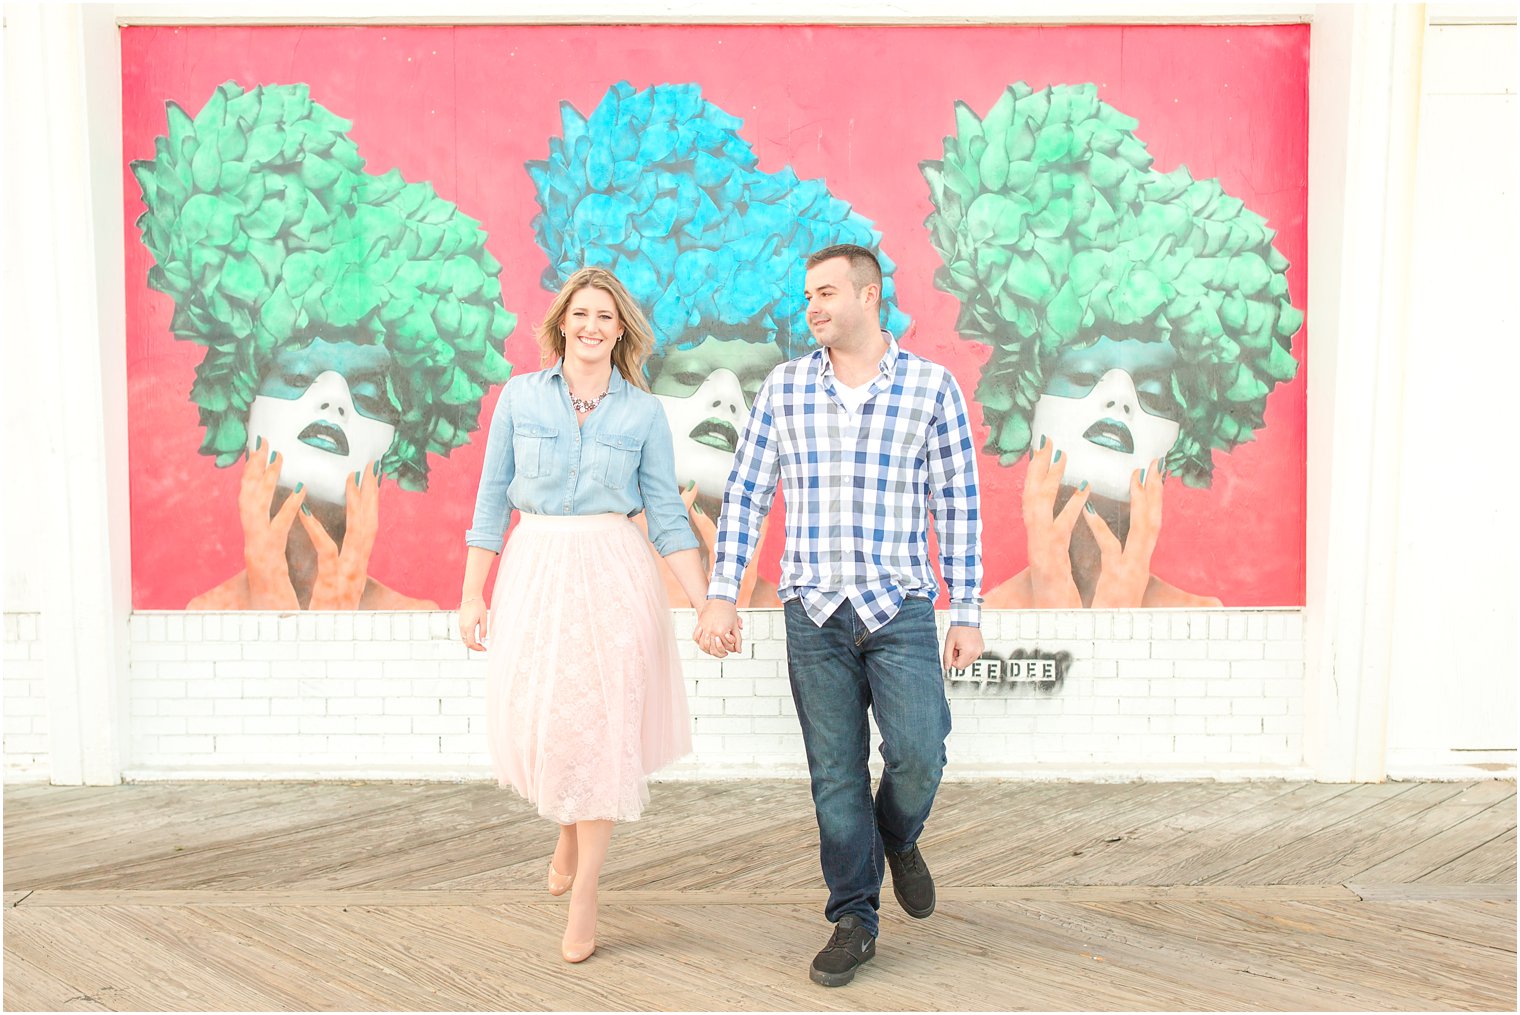 Asbury Park engagement photo on the boardwalk with murals in the background